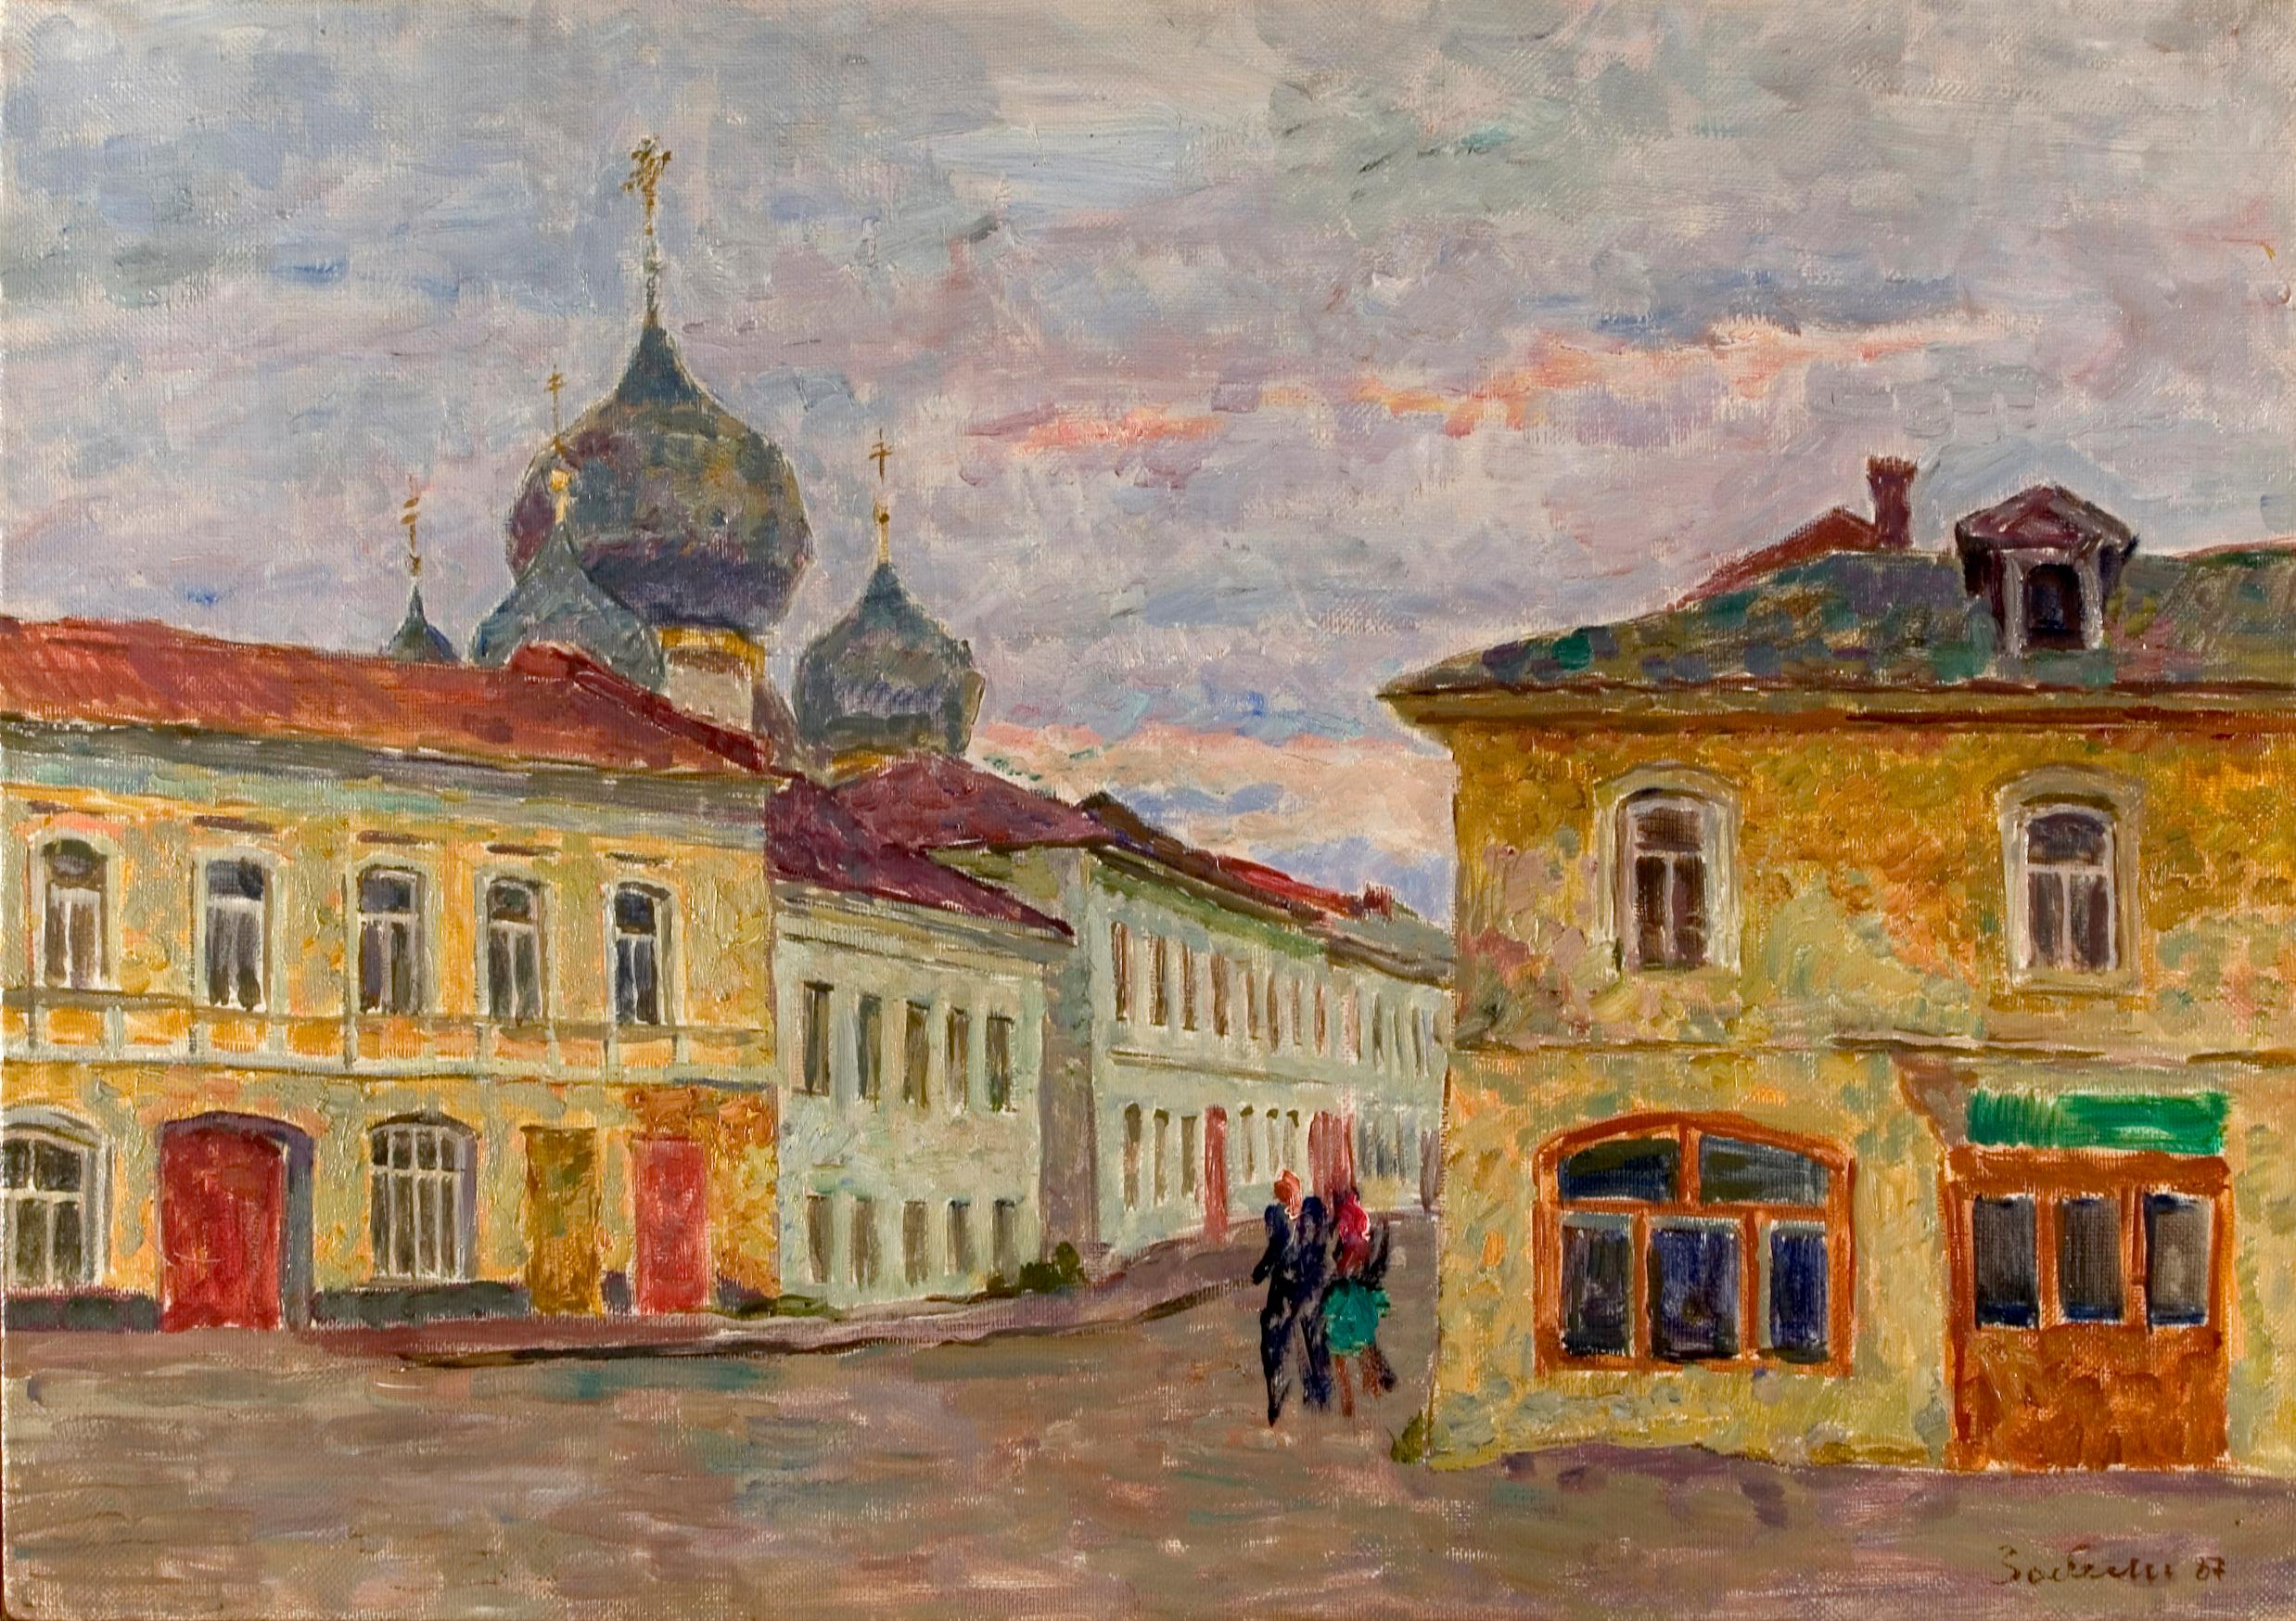 Vyacheslav Zabelin (1935- 2001) Considered a living master during his lifetime in Moscow, painted A corner in Rostov in 1987. Zabelin had already 300 paintings in museum collections throughout the world at the time of his death. A Surikov professor